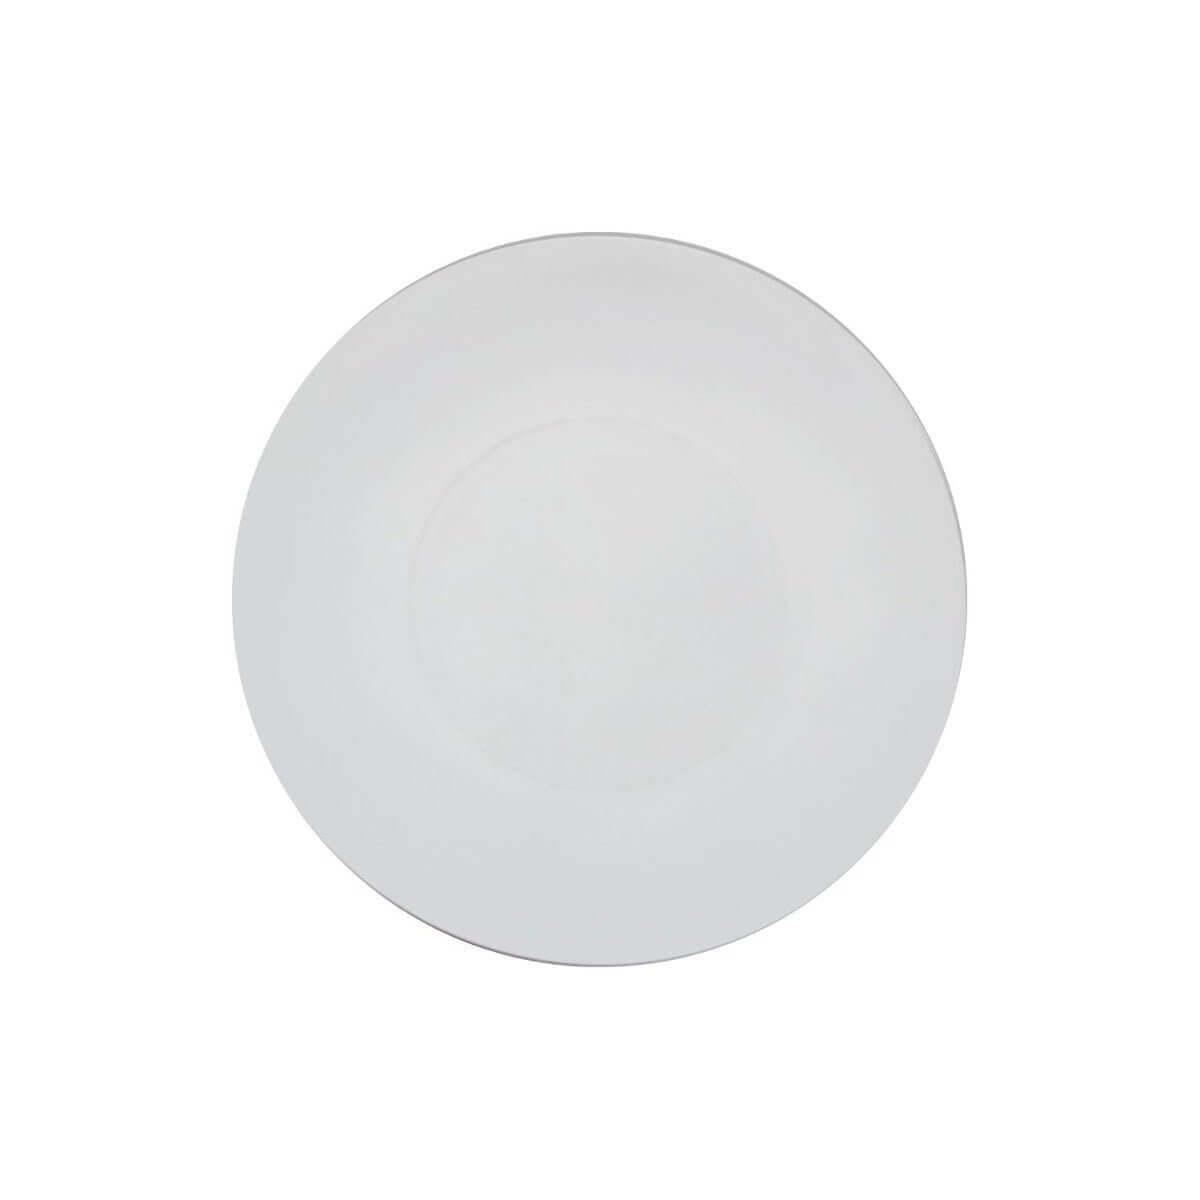 140 Piece White Combo Set | Serves 20 Guests - Yom Tov Settings